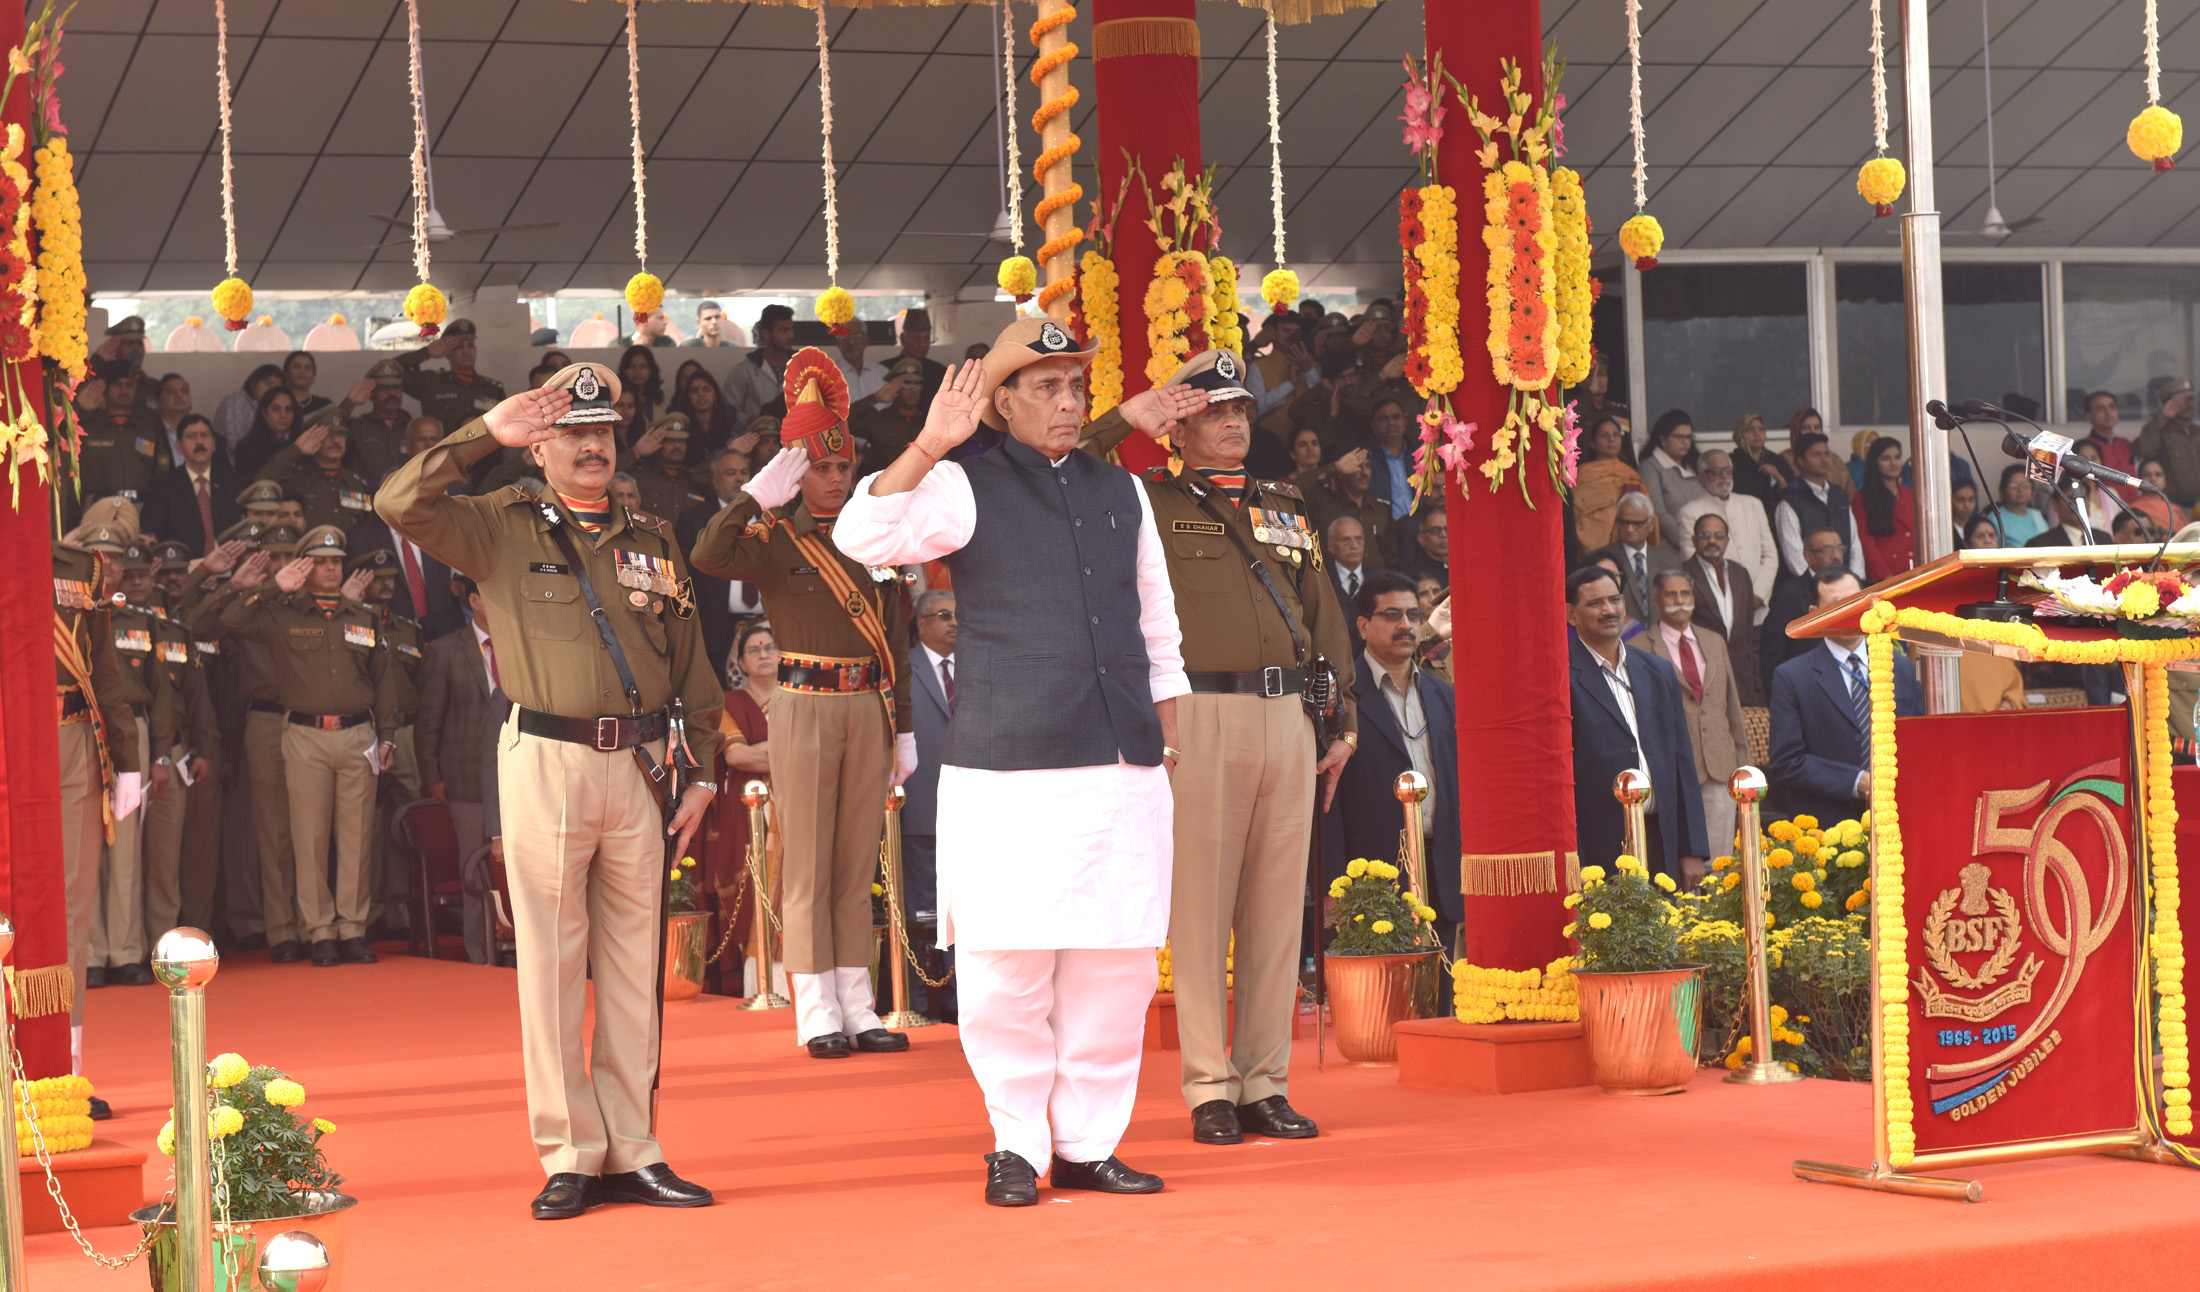 The Union Home Minister, Shri Rajnath Singh taking the salute of the BSF Golden Jubilee Parade, in New Delhi on December 01, 2015.  	The DG, BSF, Shri D.K. Pathak is also seen.